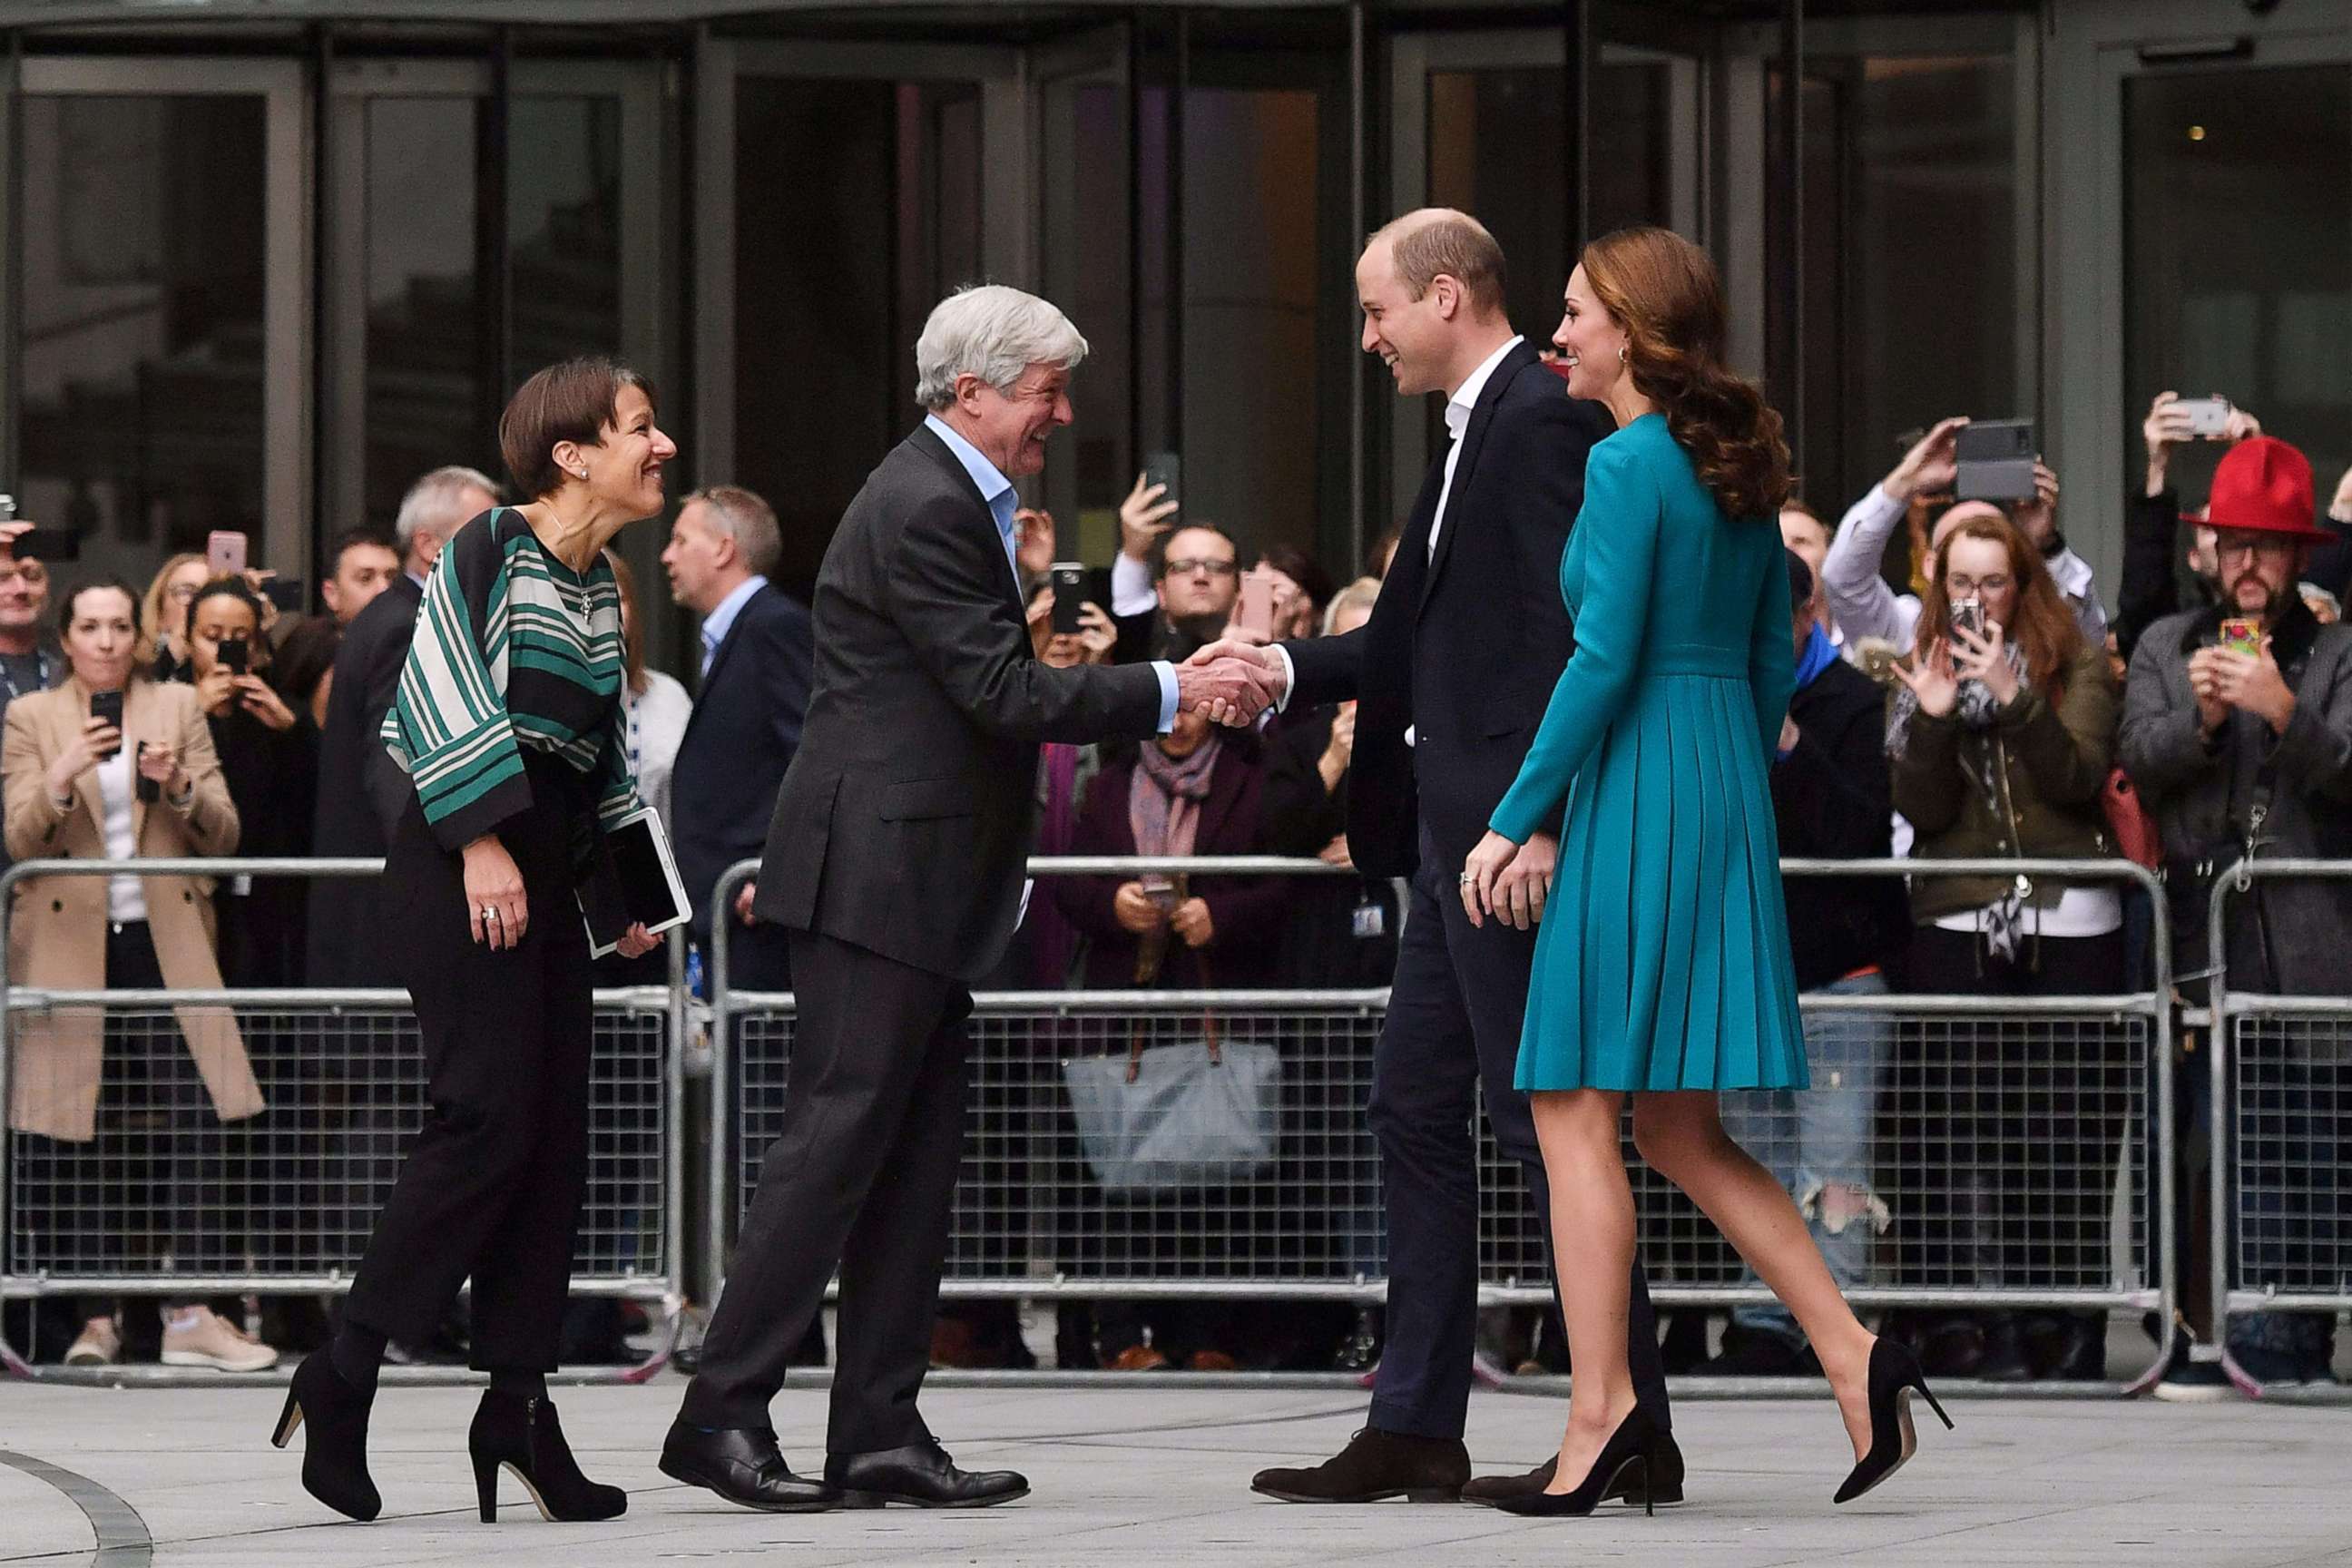 PHOTO: Britain's Prince William and his wife, Catherine, Duchess of Cambridge, are greeted by Director-General of the BBC Tony Hall and Director of BBC Children's Alice Webb during a visit to the BBC Broadcasting House in London, Nov. 15, 2018.